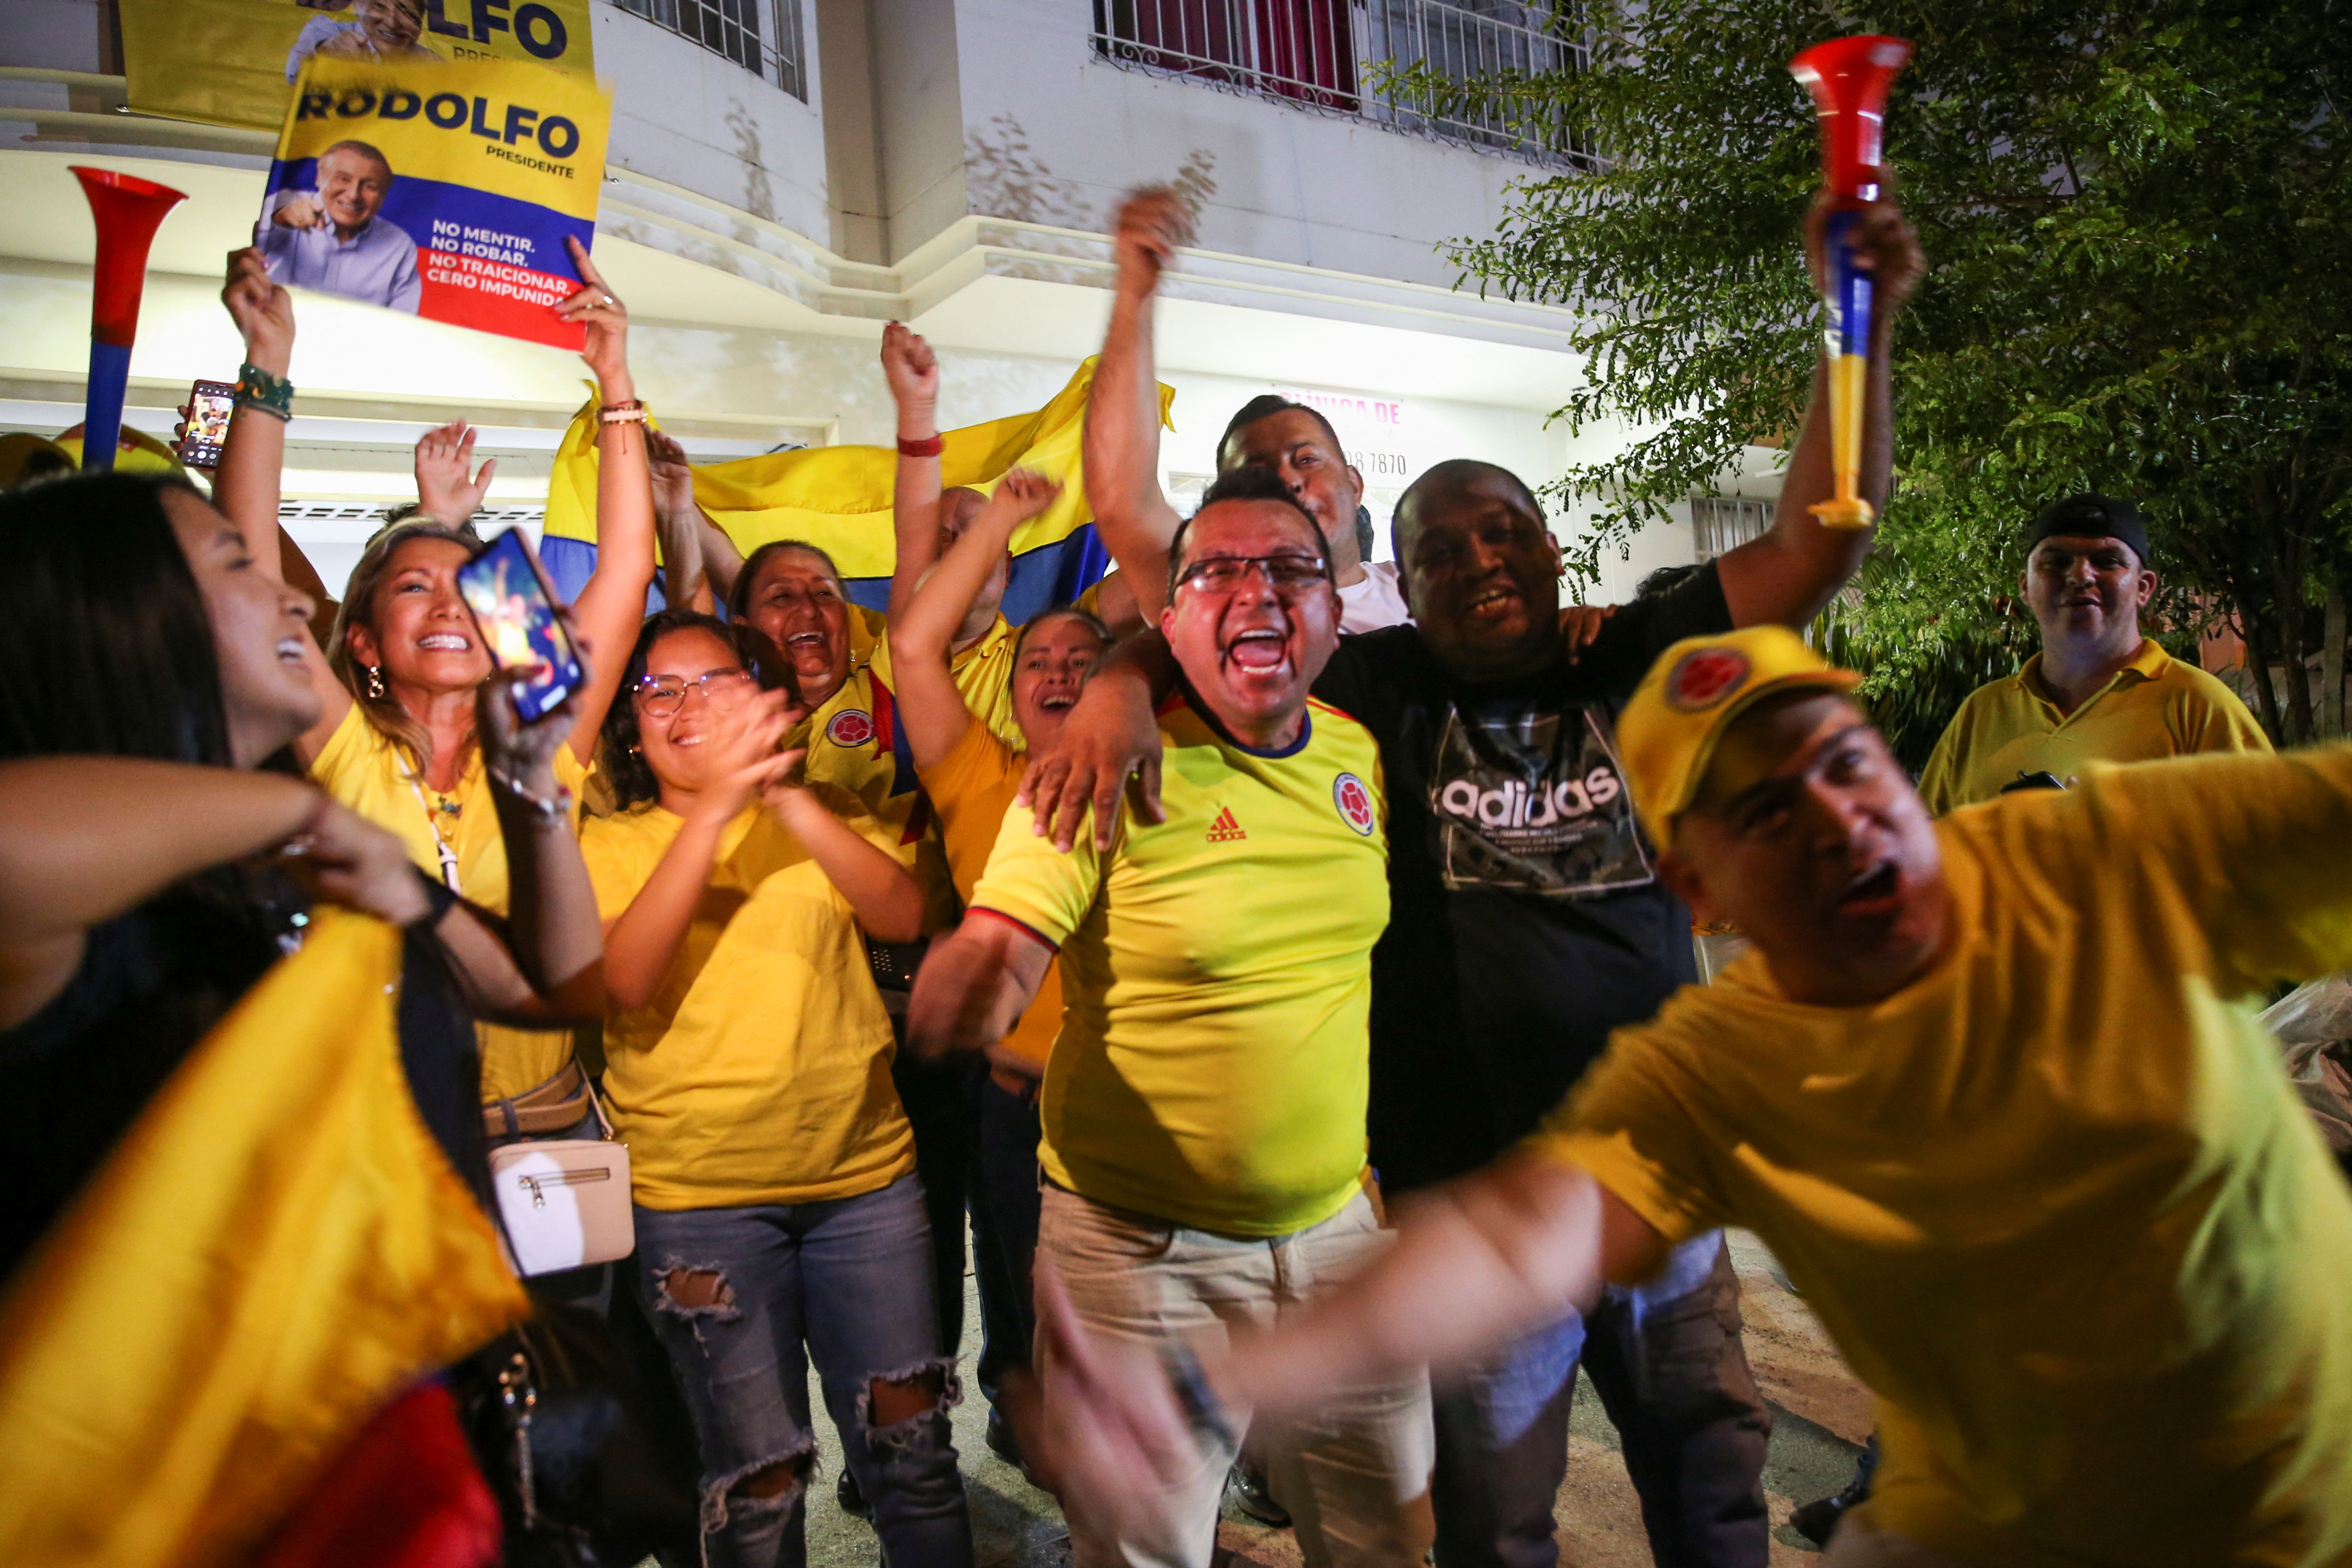 Supporters of Colombian centre-right presidential candidate Rodolfo Hernandez of Anti-Corruption Rulers' League Party react after he came out second in the first round of the presidential election in Cali, Colombia May 29, 2022. REUTERS/Luisa Gonzalez